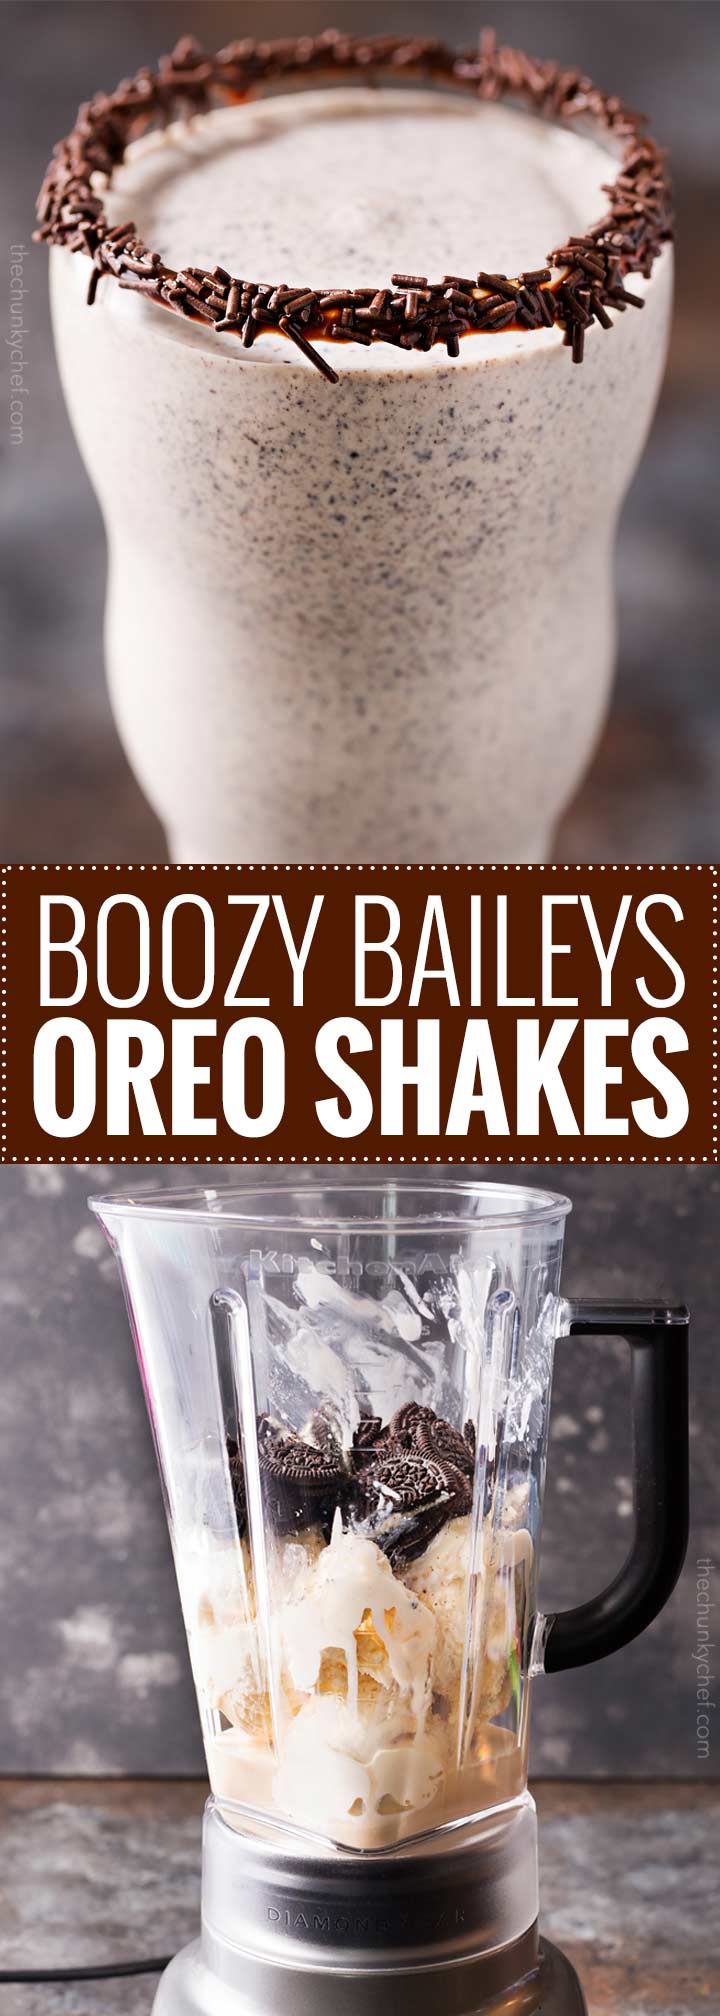 Cookies and cream flavors abound in this boozy oreo milkshake recipe! Blended with both Baileys and vanilla vodka, the taste is second to none, and will satisfy any sweet craving! | #milkshake #oreo #cookiesandcream #boozy #baileys #frozen #recipe